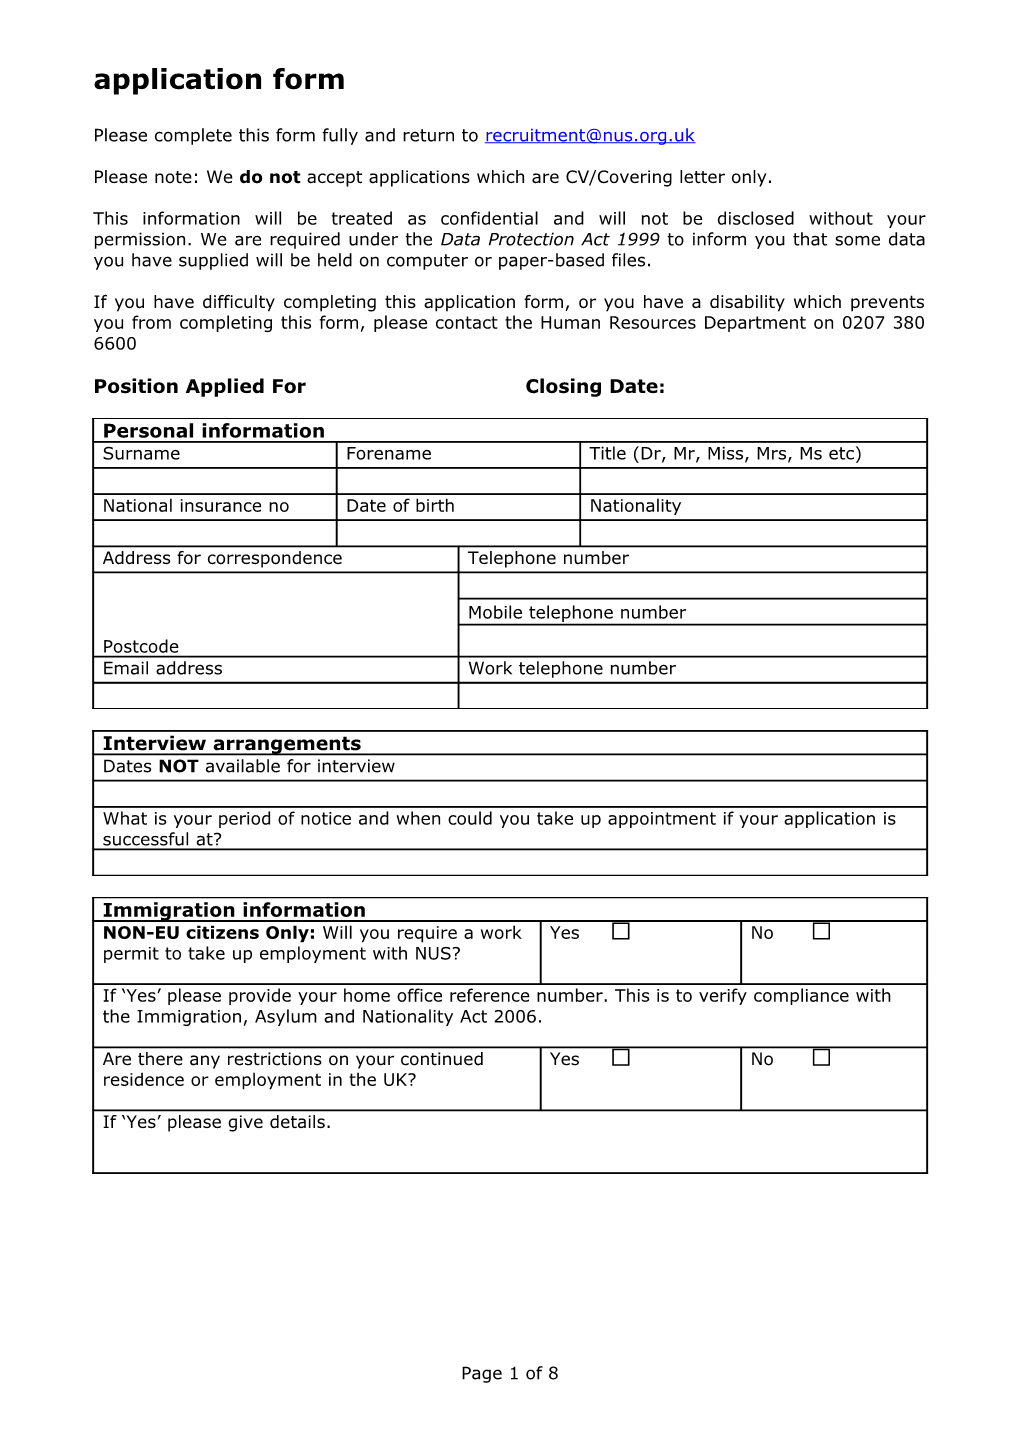 Please Complete This Form Fully and Return To